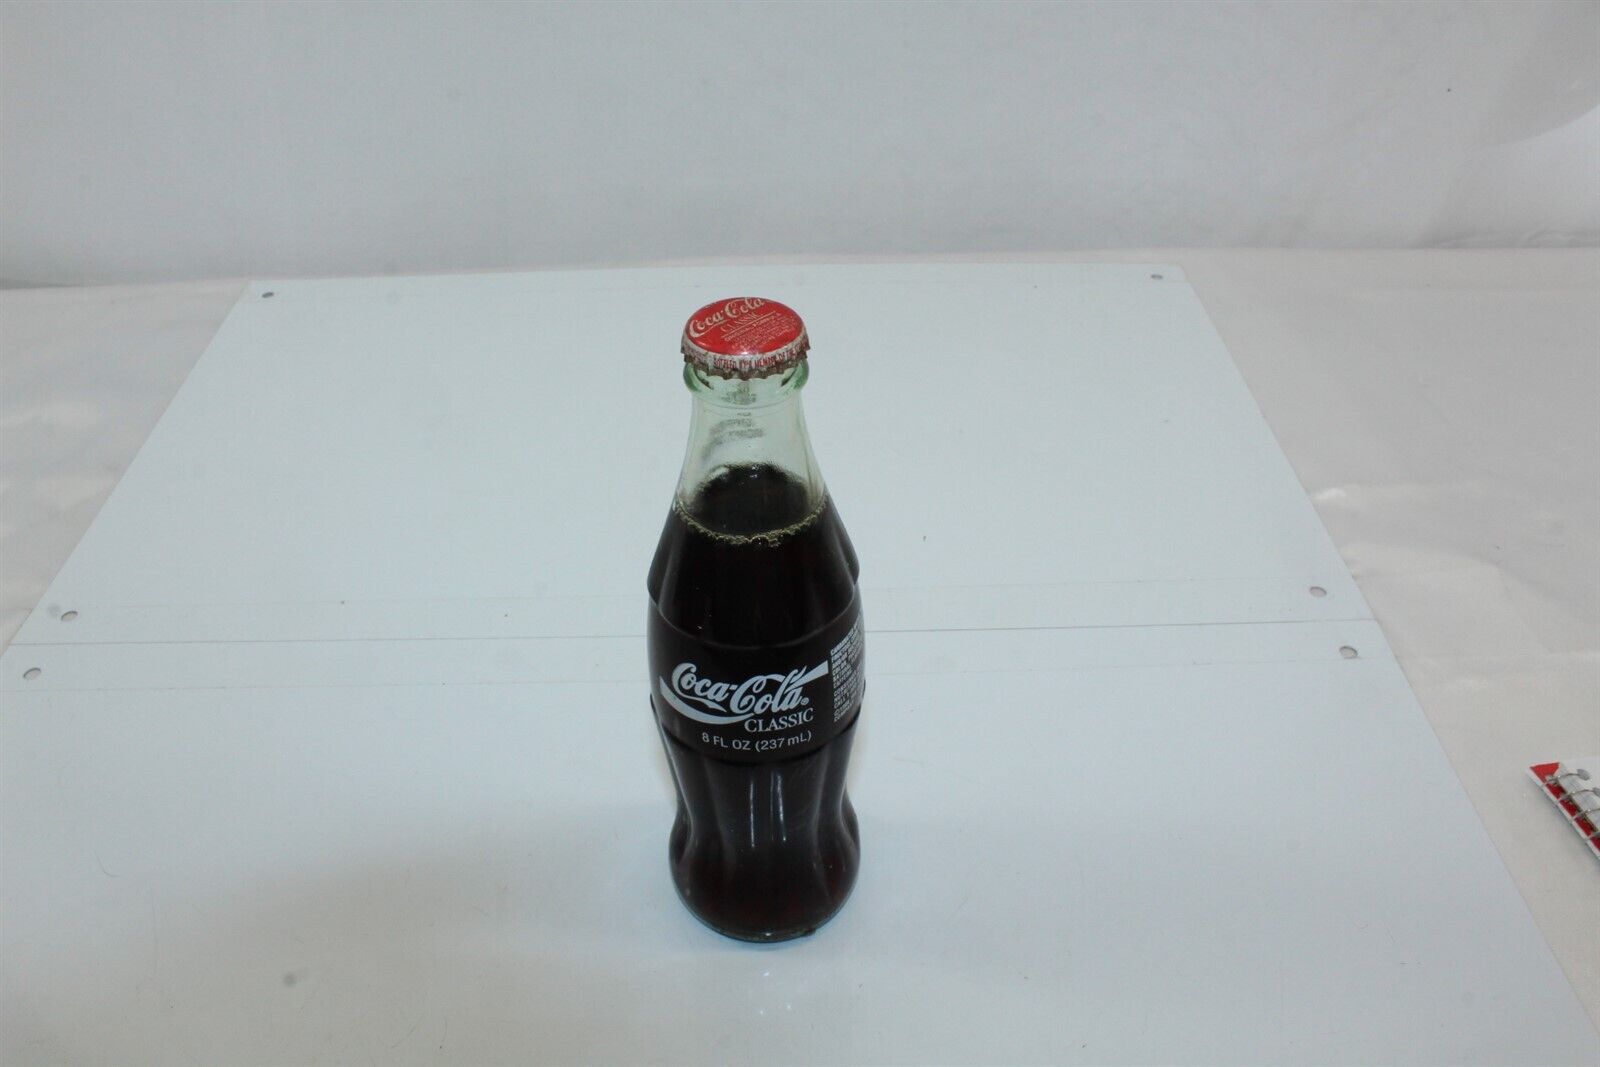 1994 Chicago World Cup Collectible Coke Bottle Coca-Cola Classic Advertising